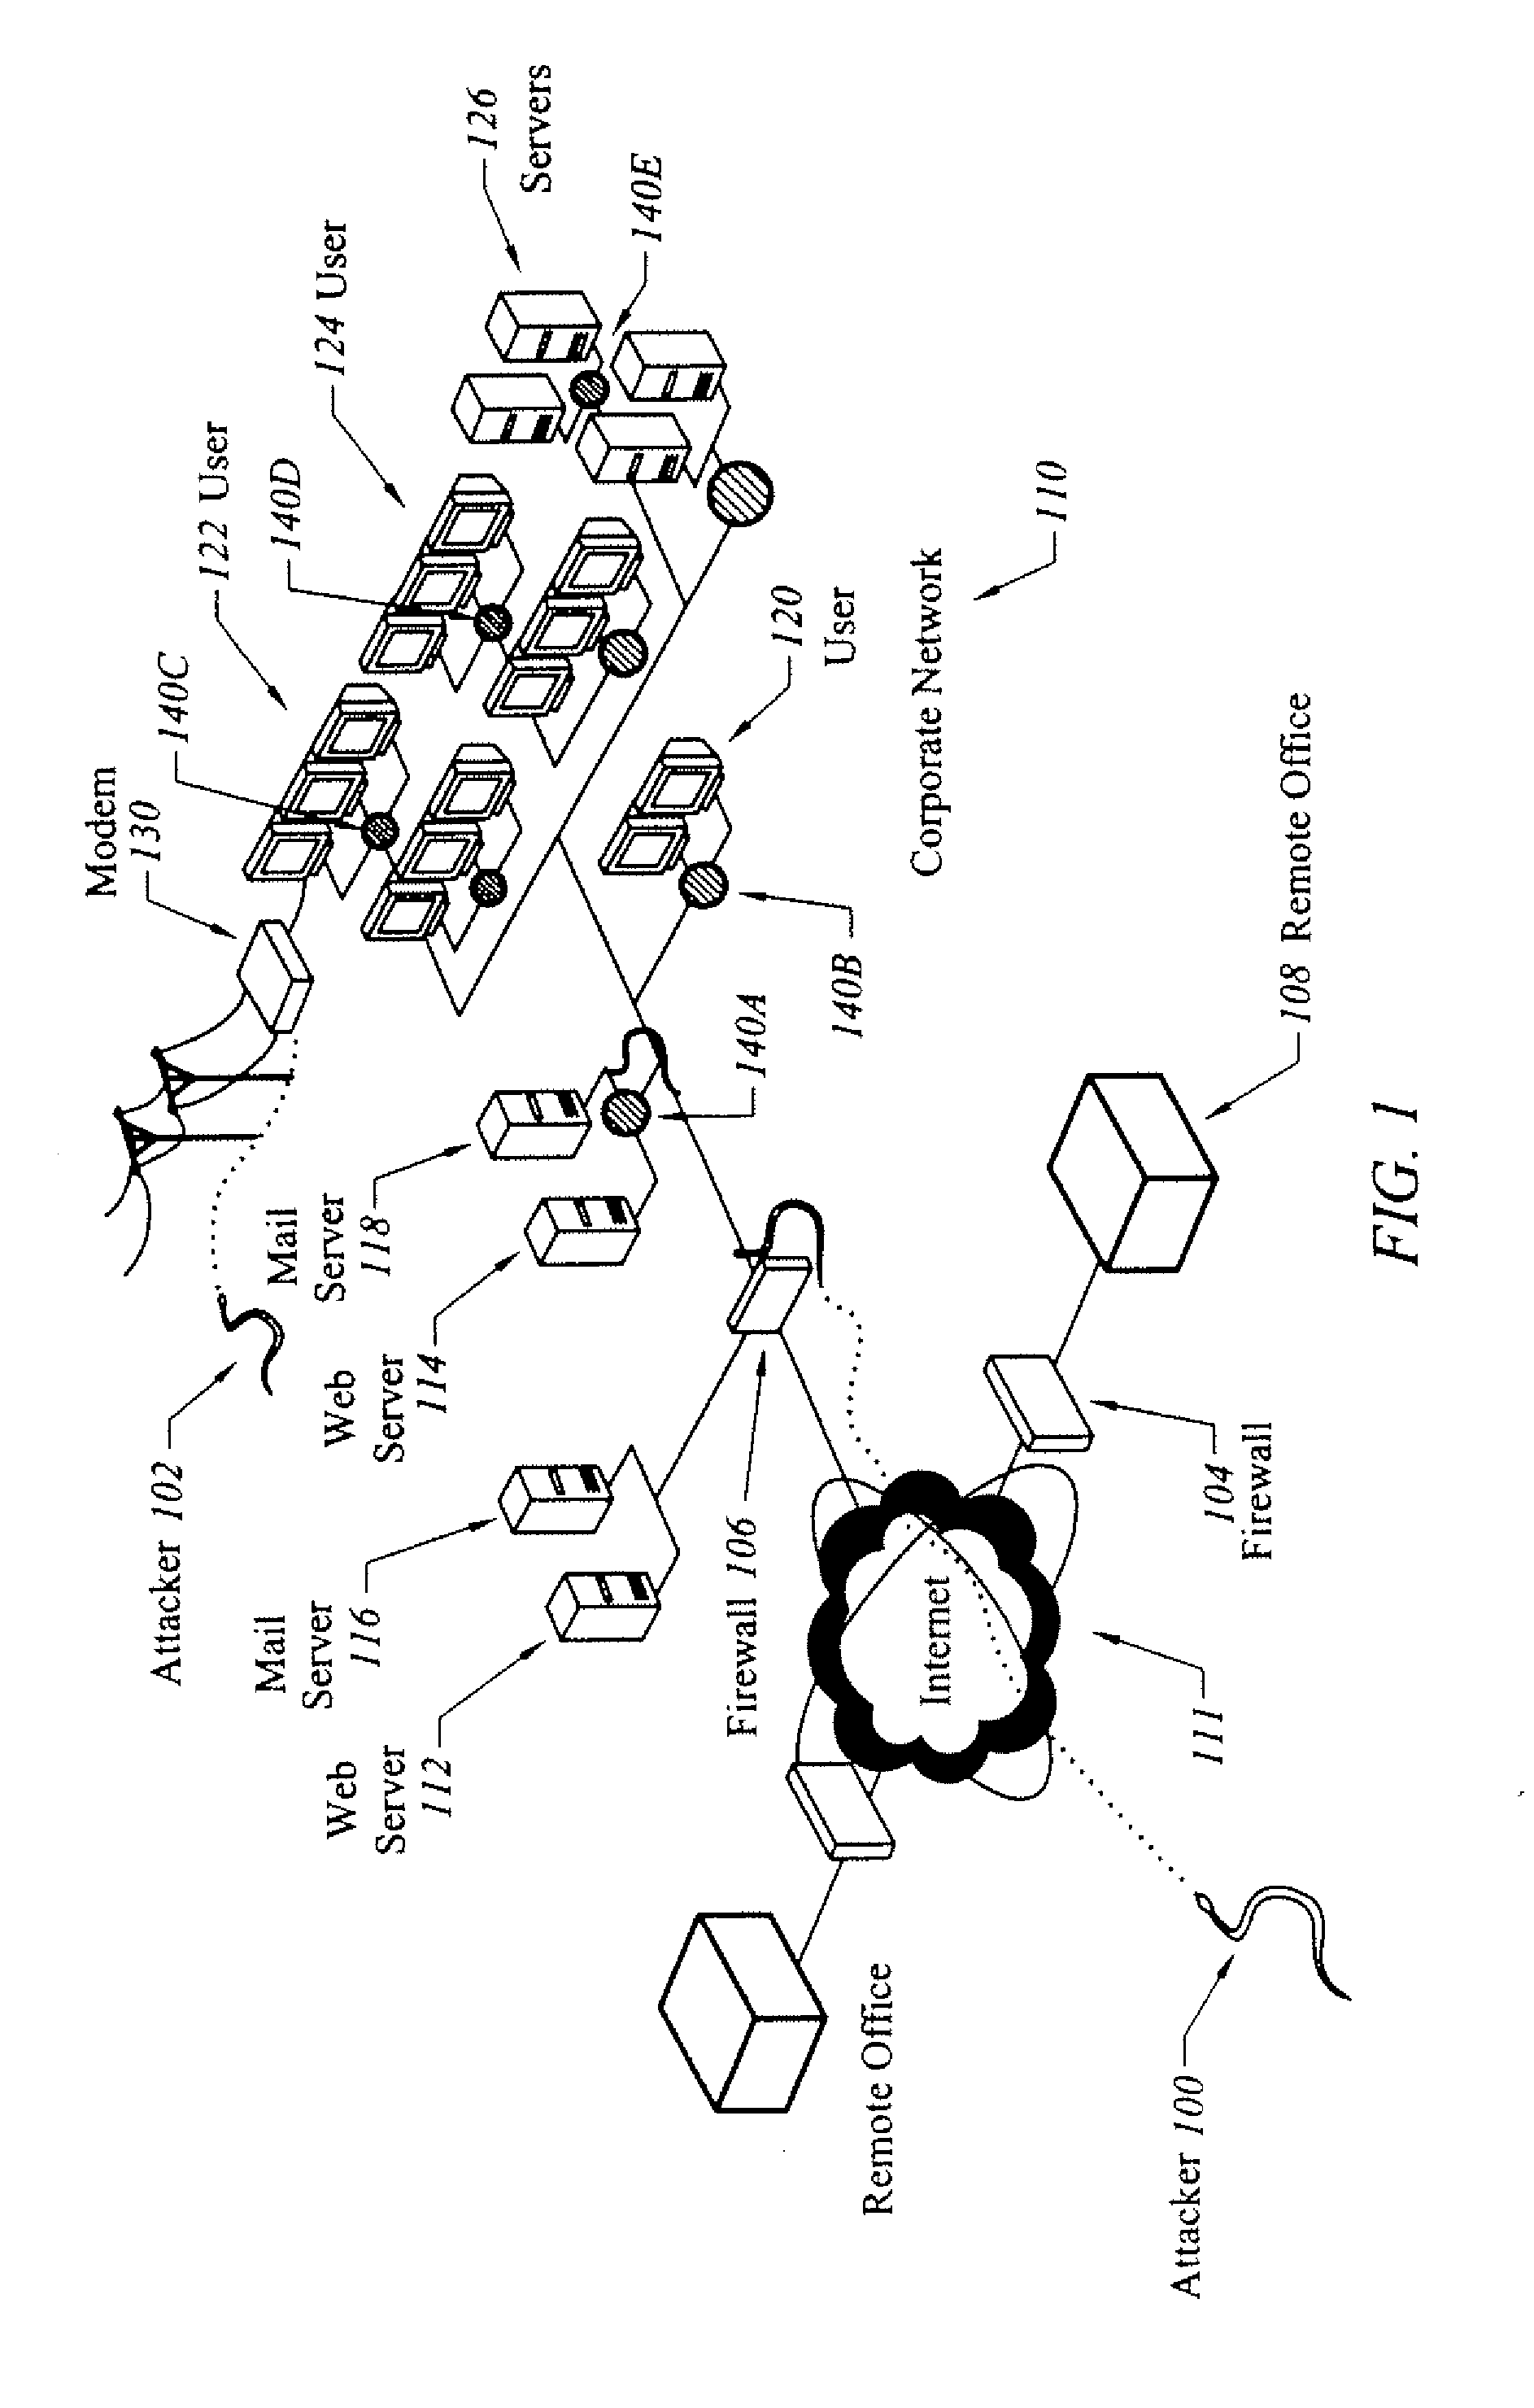 Apparatus and method for enhancing forwarding and classification of network traffic with prioritized matching and categorization